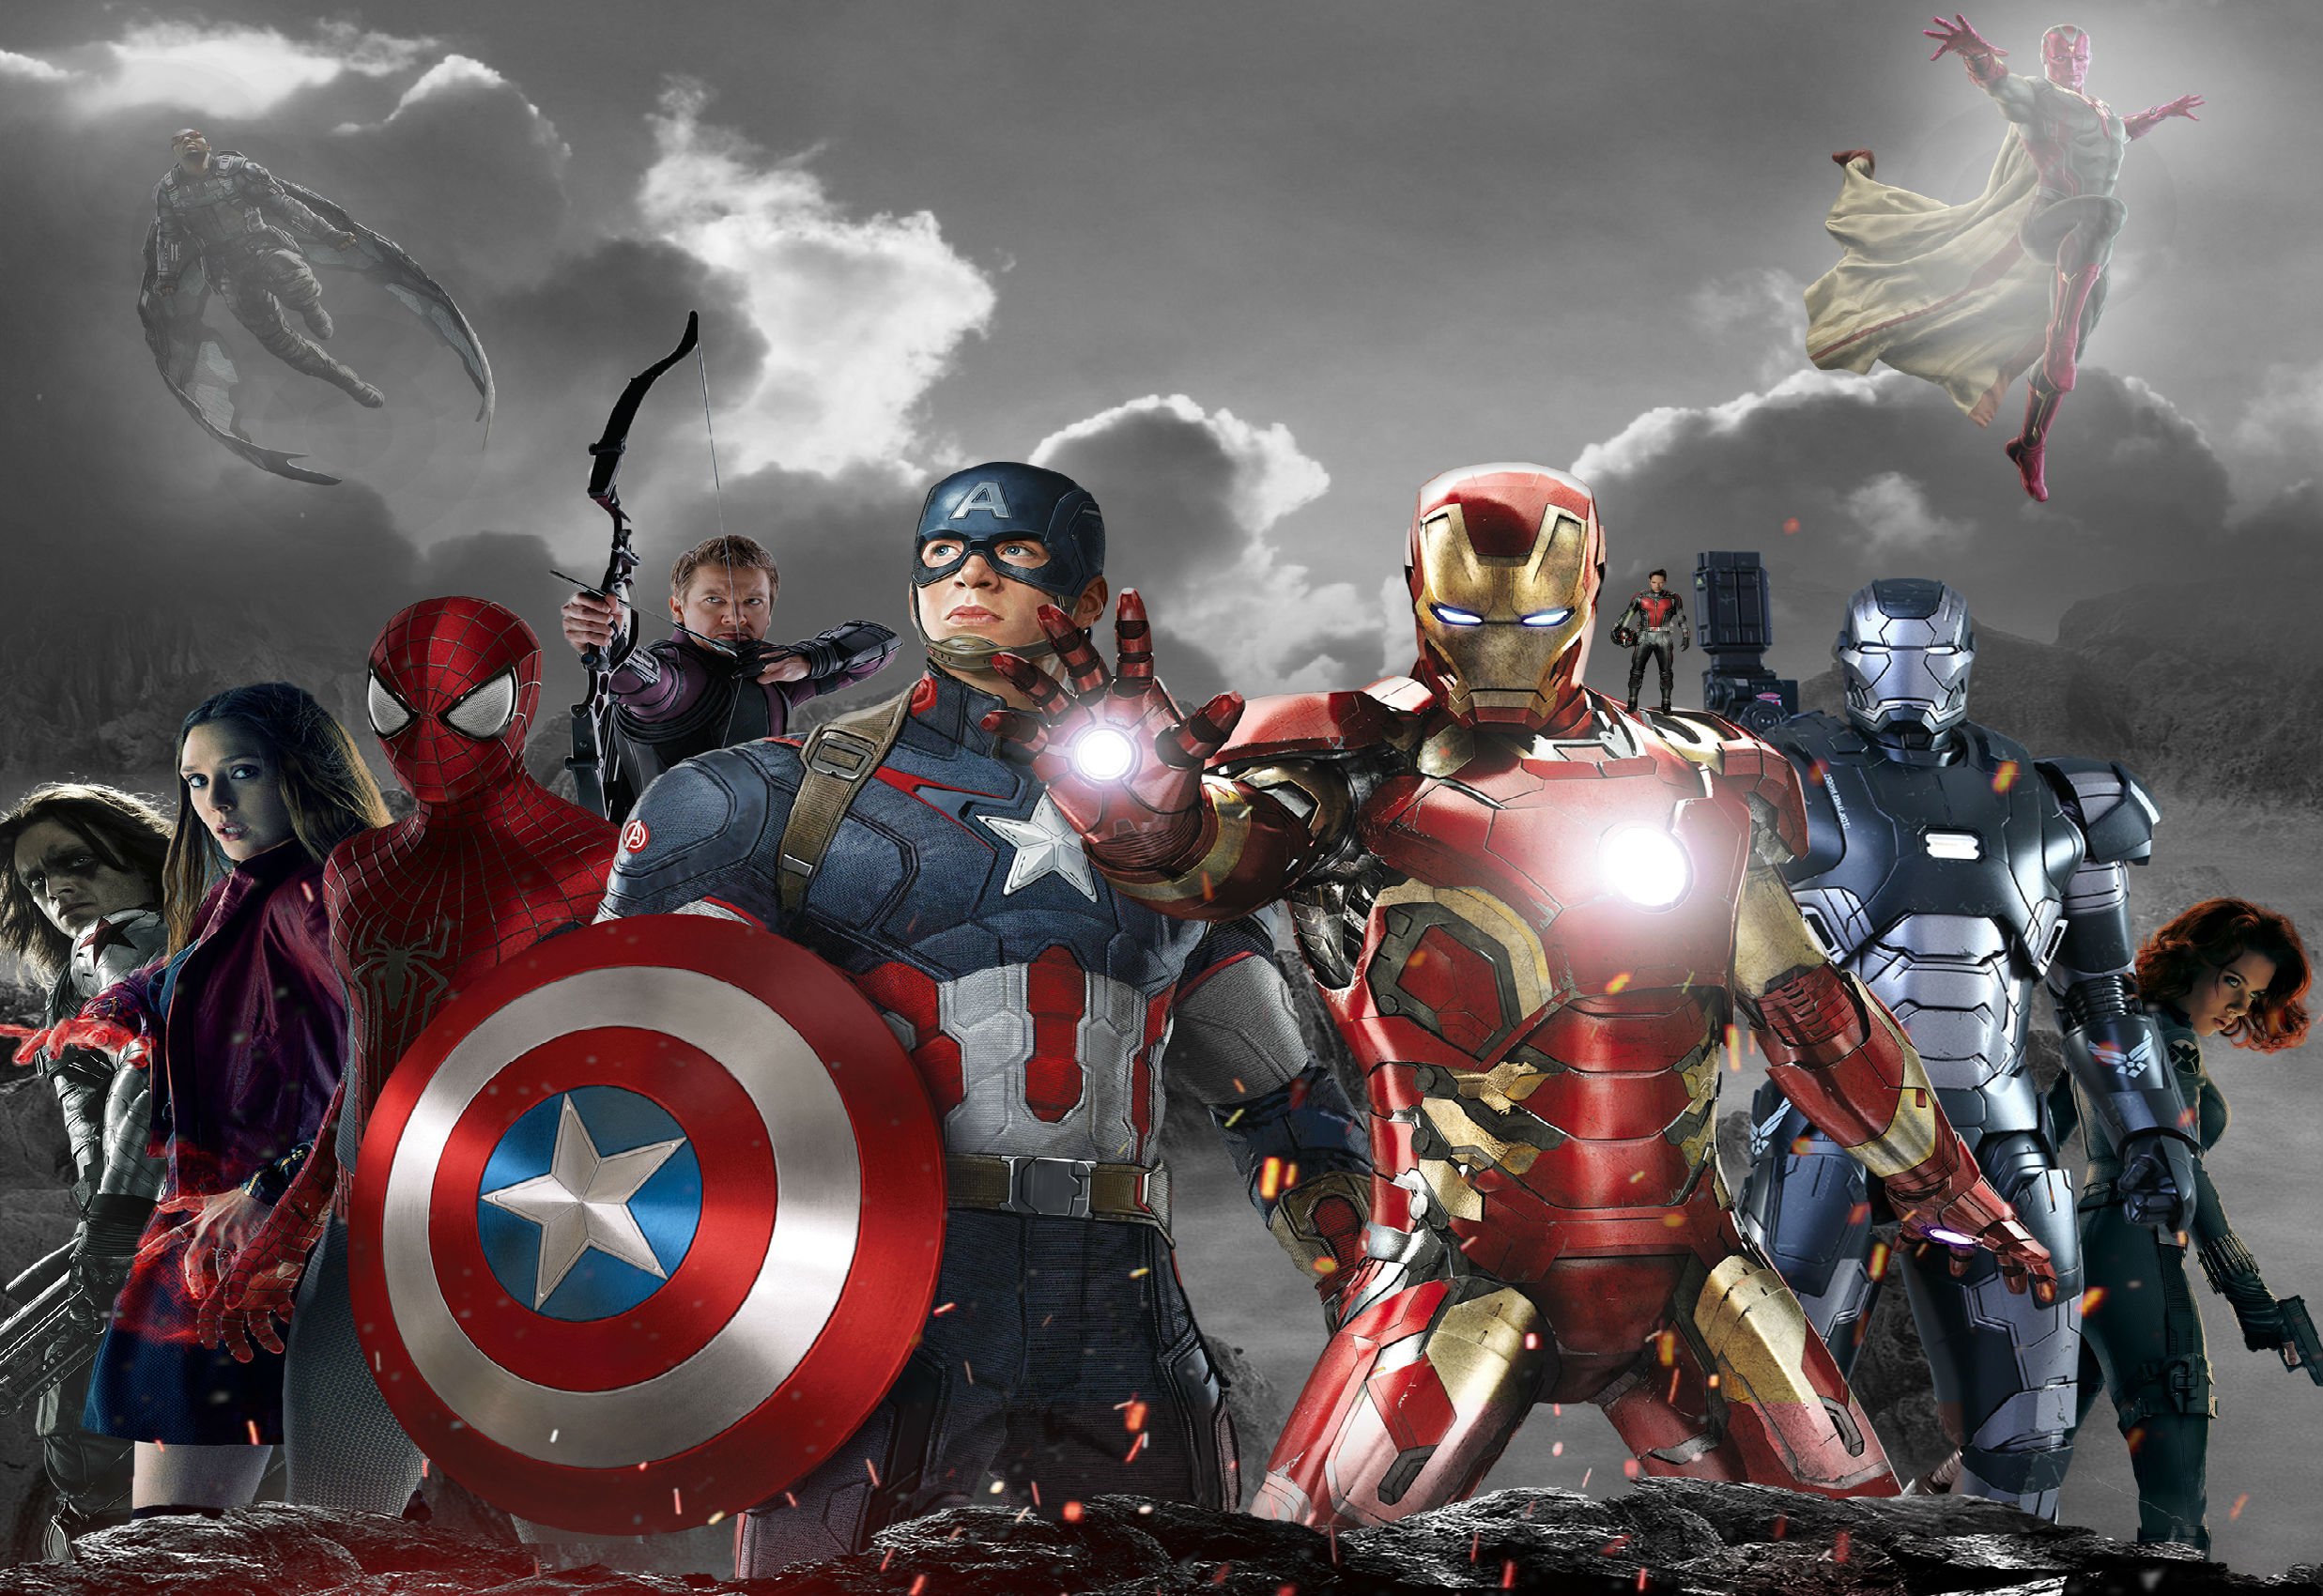 Action Fighting 1cacw Warrior Sci Fi Avengers Wallpaper Background